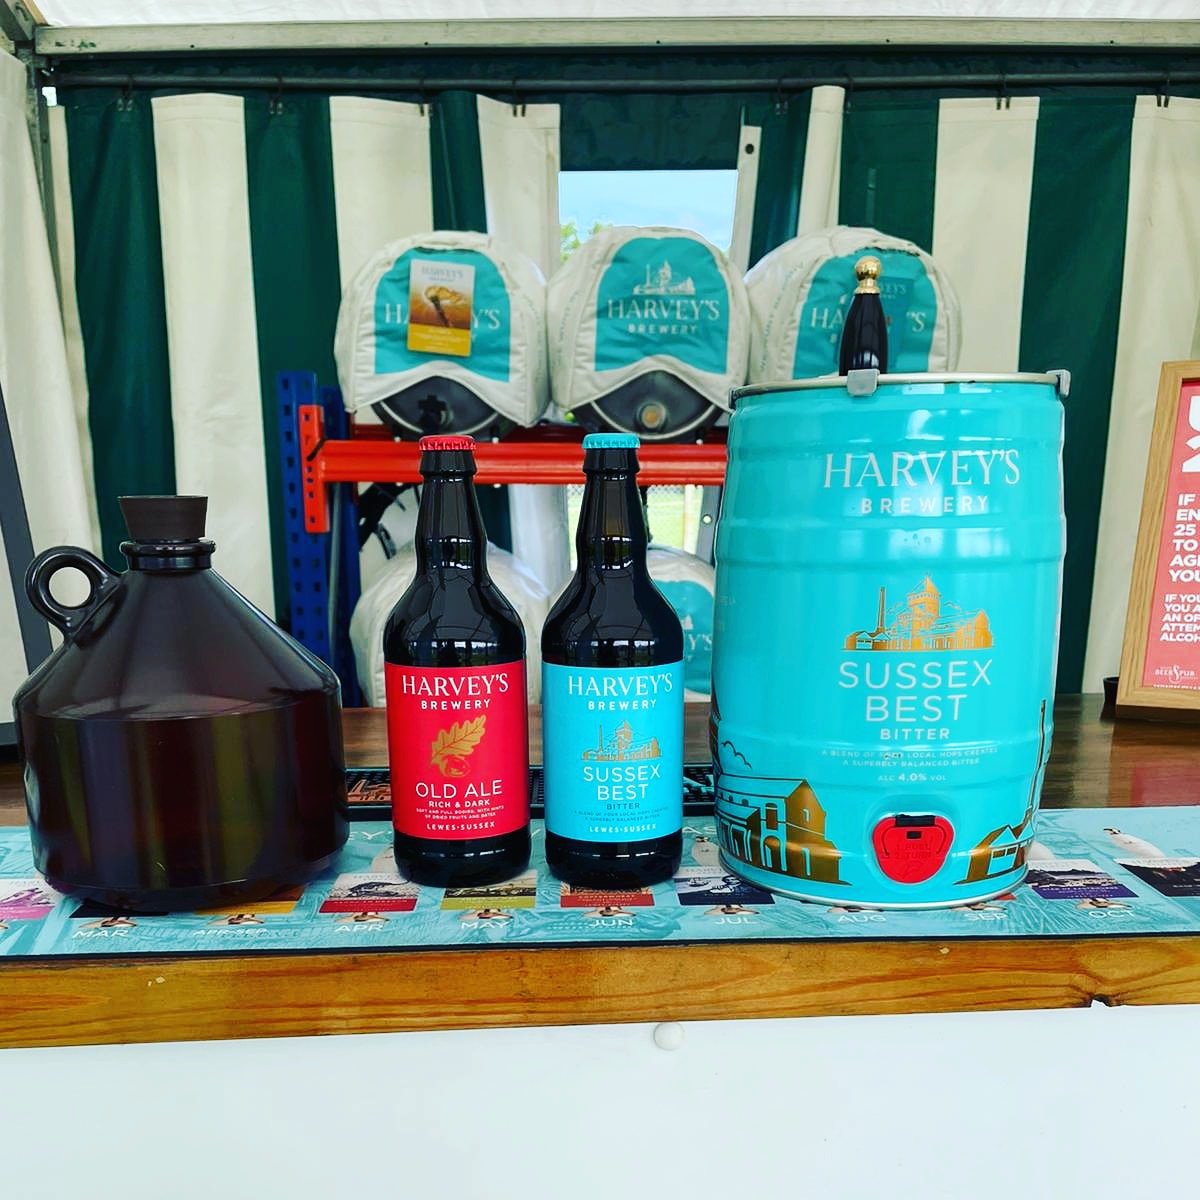 @Harveys1790 Sussex Best Mini 5L Kegs and Sussex Best and Old Ale 500ml Bottles on sale today @SouthEngShows. Serving Best & Olympia draught all weekend, or fill up a takeaway hopper to enjoy at home!
#southofenglandshow #mobilebar #hopbar #harveysbeers #sussex #events